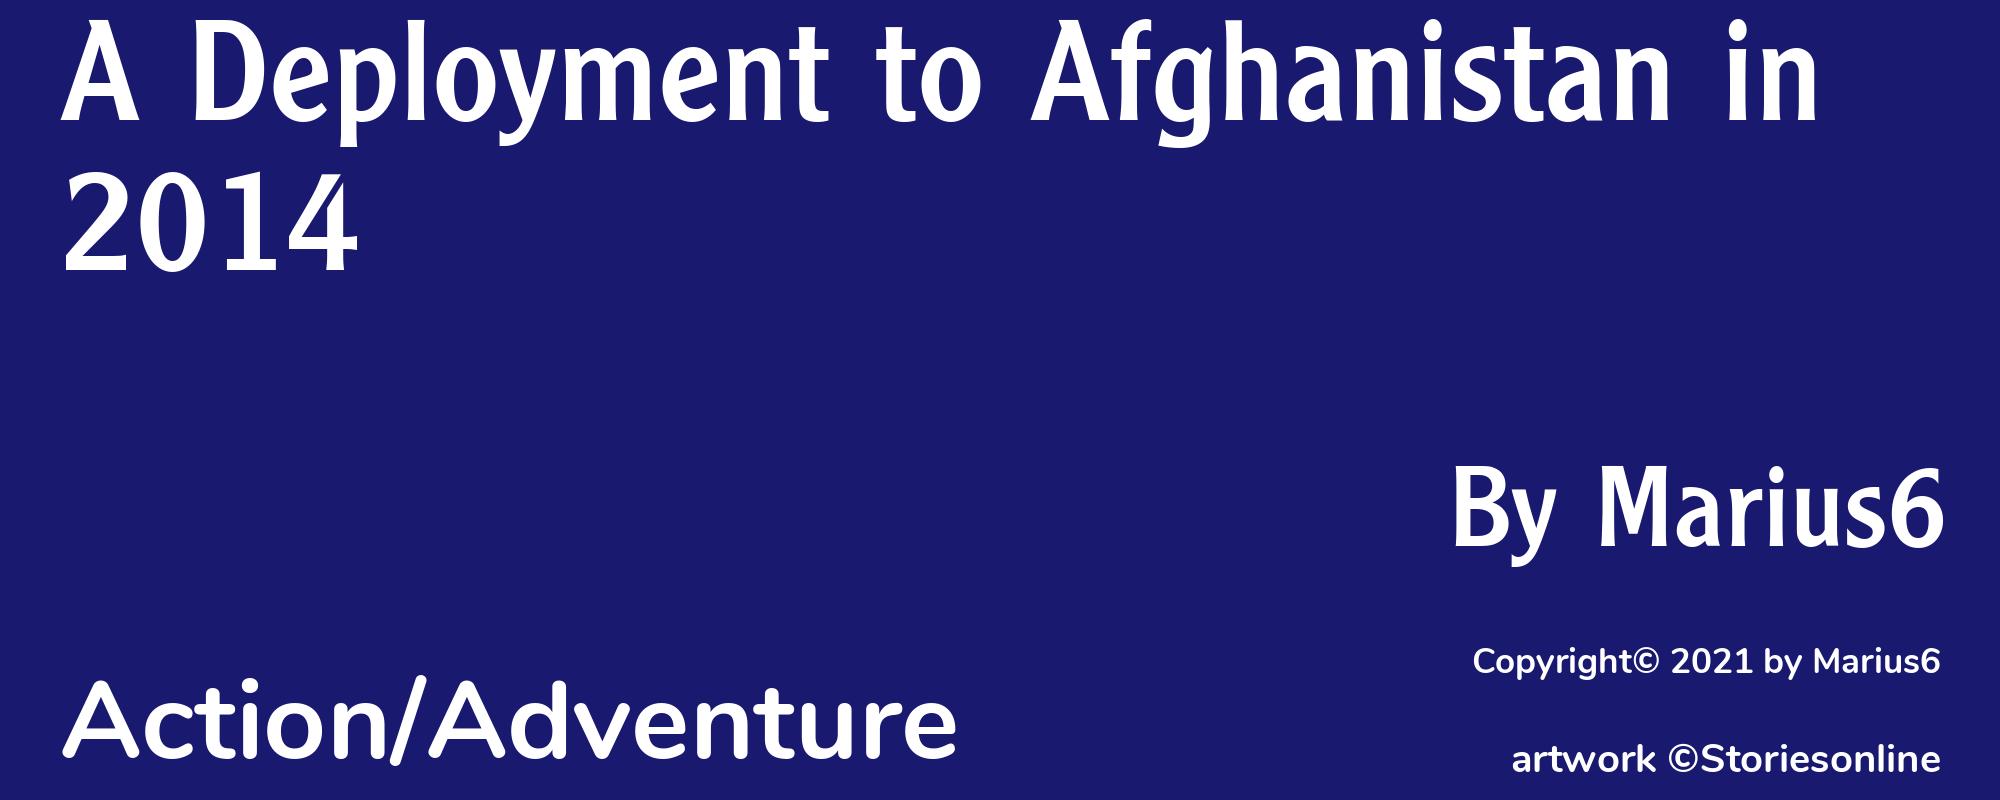 A Deployment to Afghanistan in 2014 - Cover